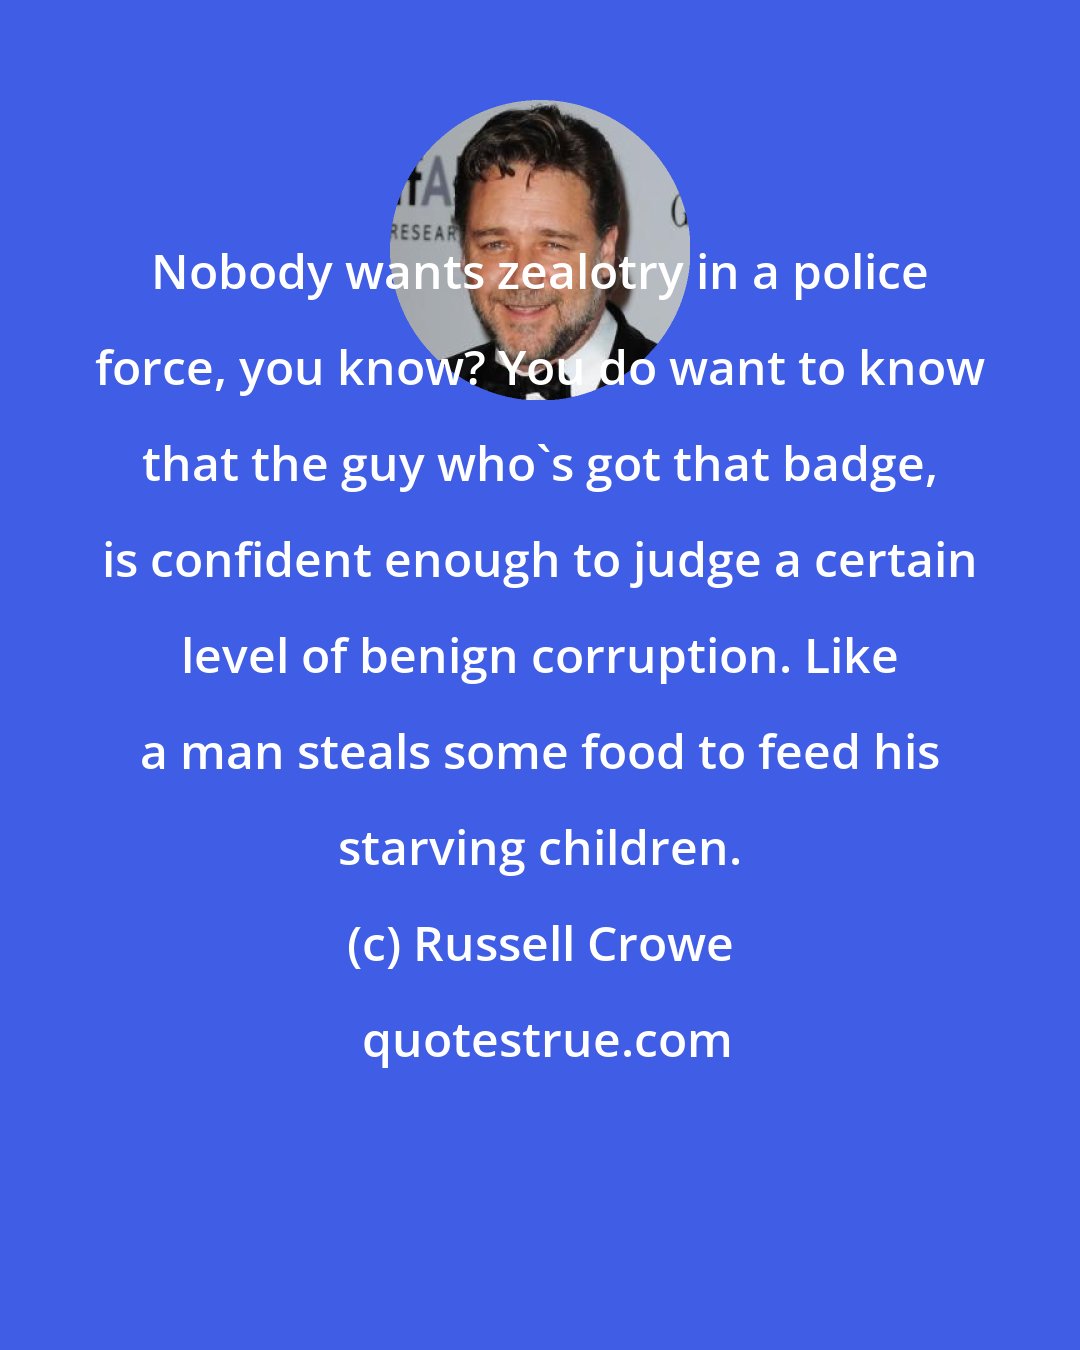 Russell Crowe: Nobody wants zealotry in a police force, you know? You do want to know that the guy who's got that badge, is confident enough to judge a certain level of benign corruption. Like a man steals some food to feed his starving children.